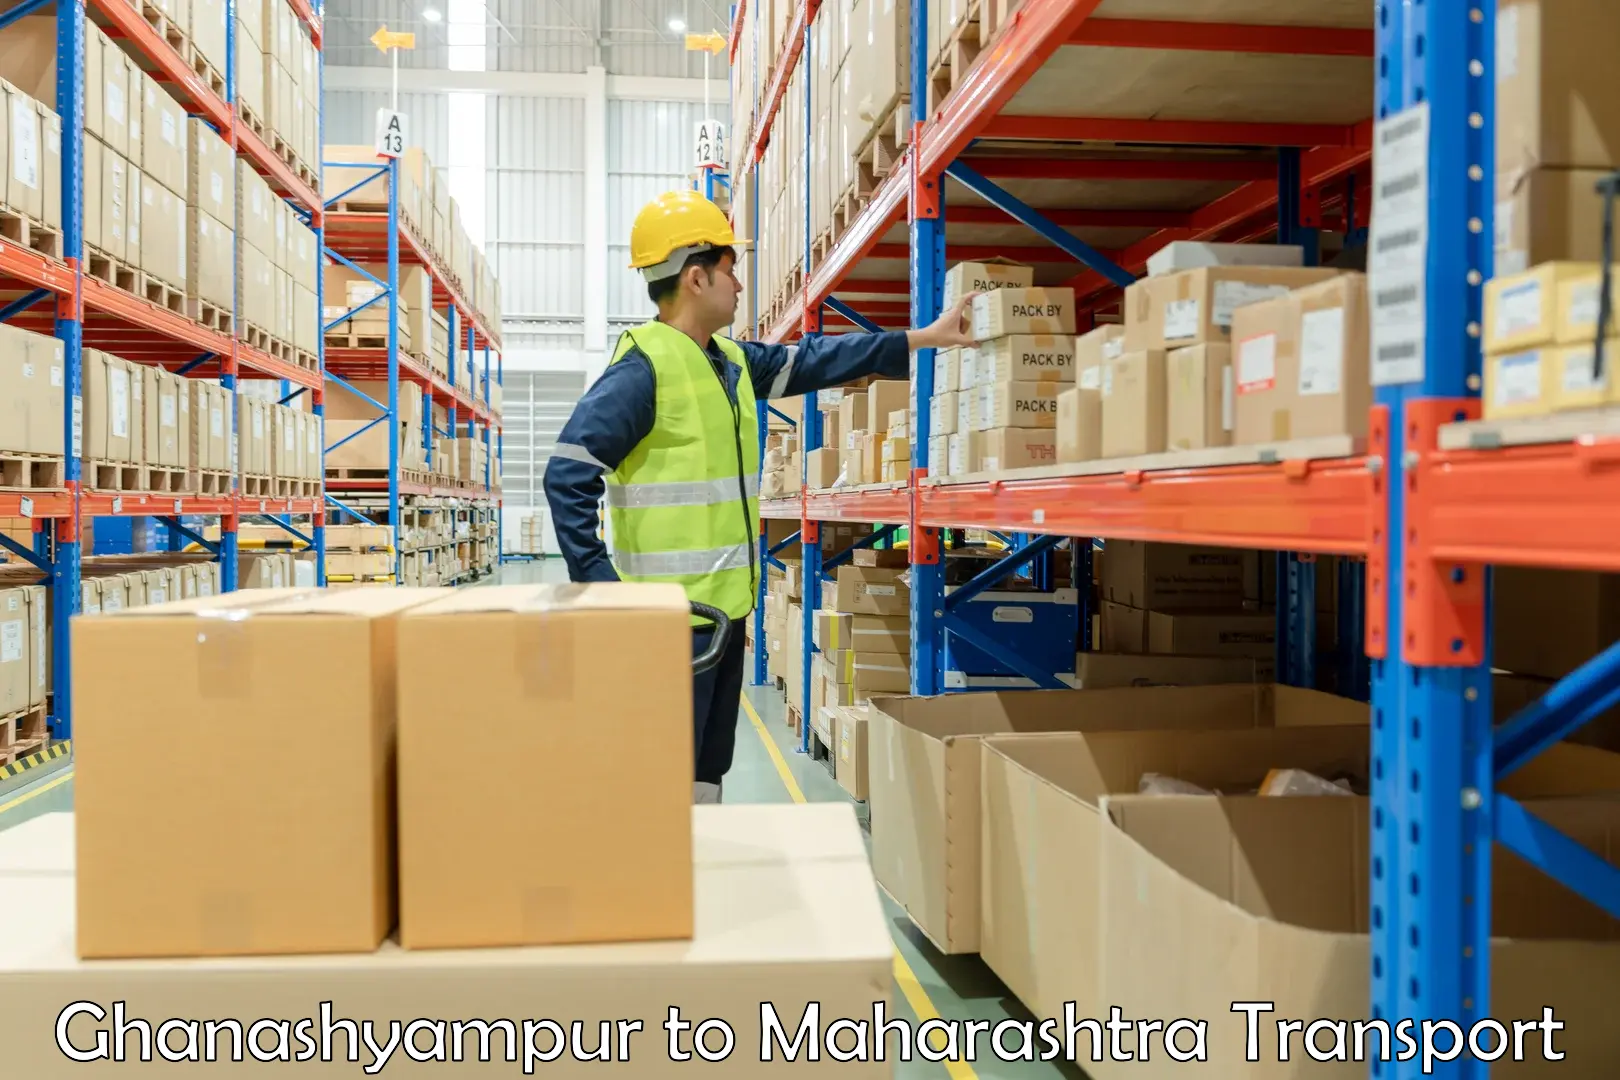 Air freight transport services Ghanashyampur to Gondpipri